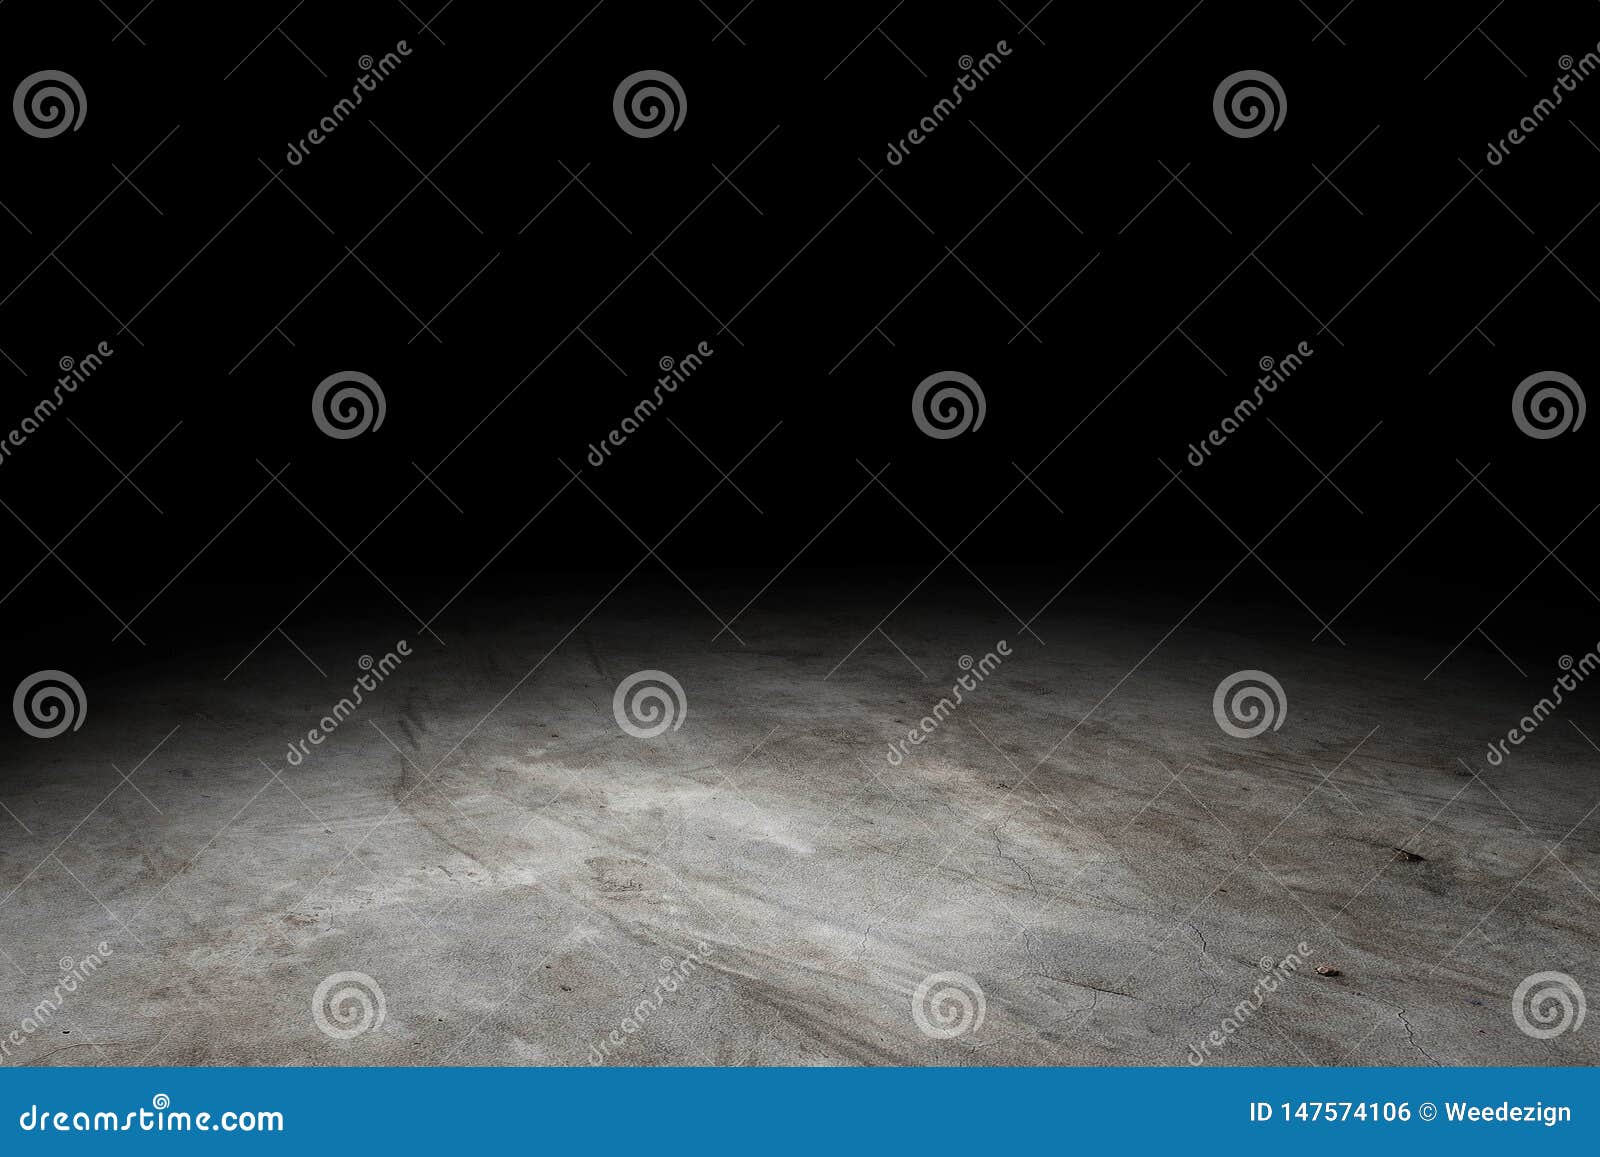 grunge concrete floor texture perspective background for display or montage of product,mock up template for your 